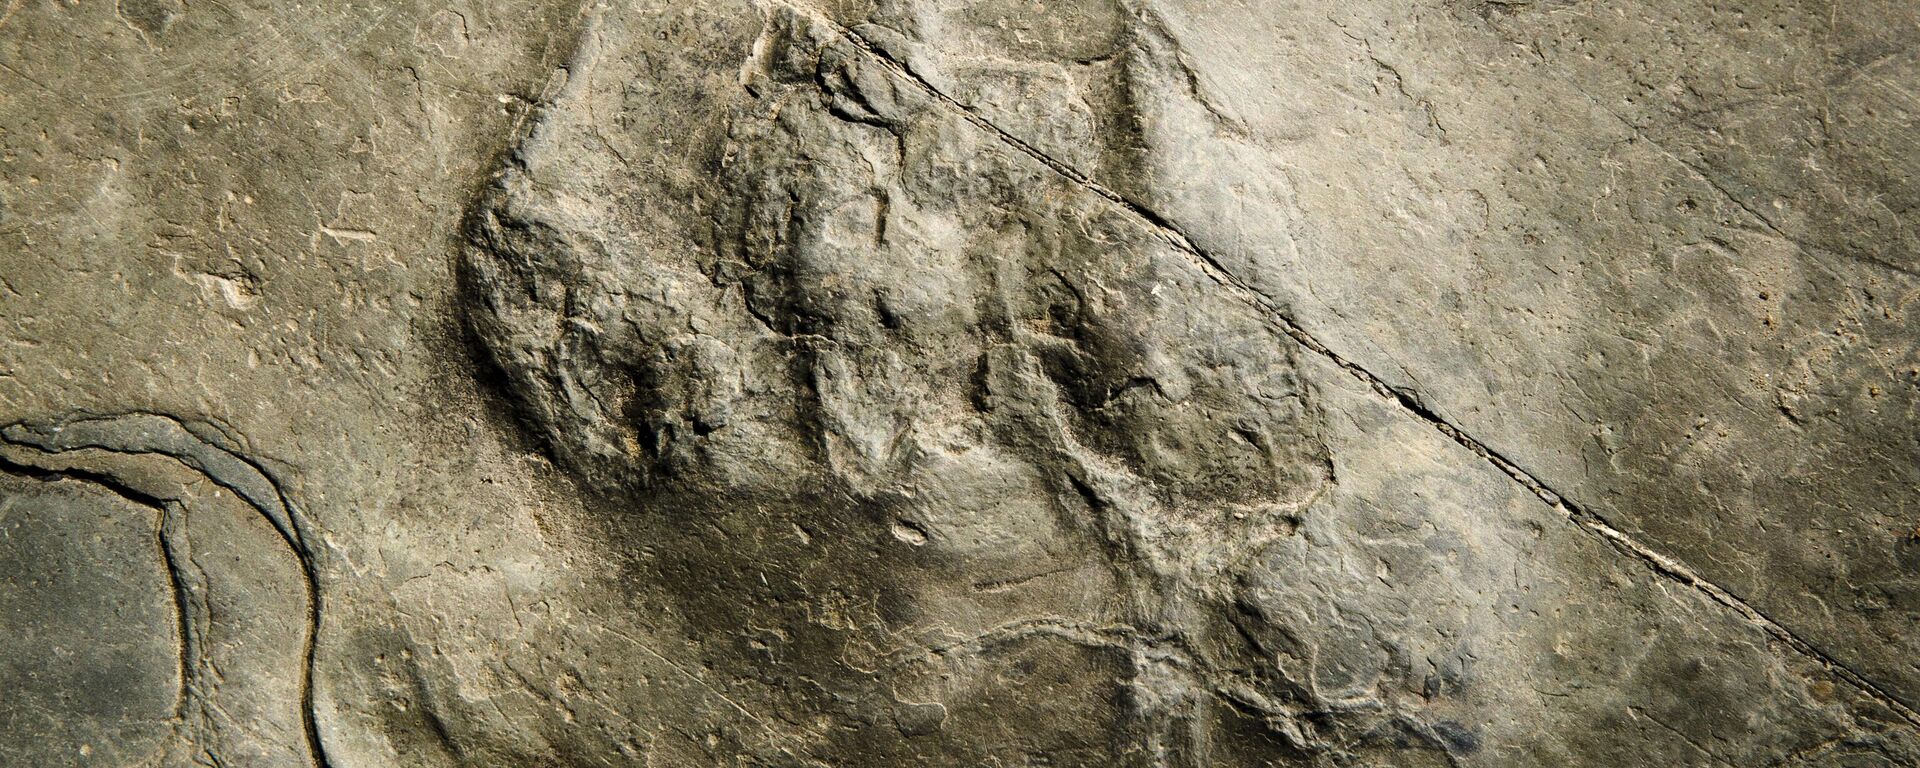 In this Feb. 28, 2019 photo, a fossilized footprint from a non-dinosaur reptile, a relative of the modern crocodile, is shown on a paving stone at the Valley Forge National Historical Park in Valley Forge, Pa. - Sputnik International, 1920, 02.09.2023